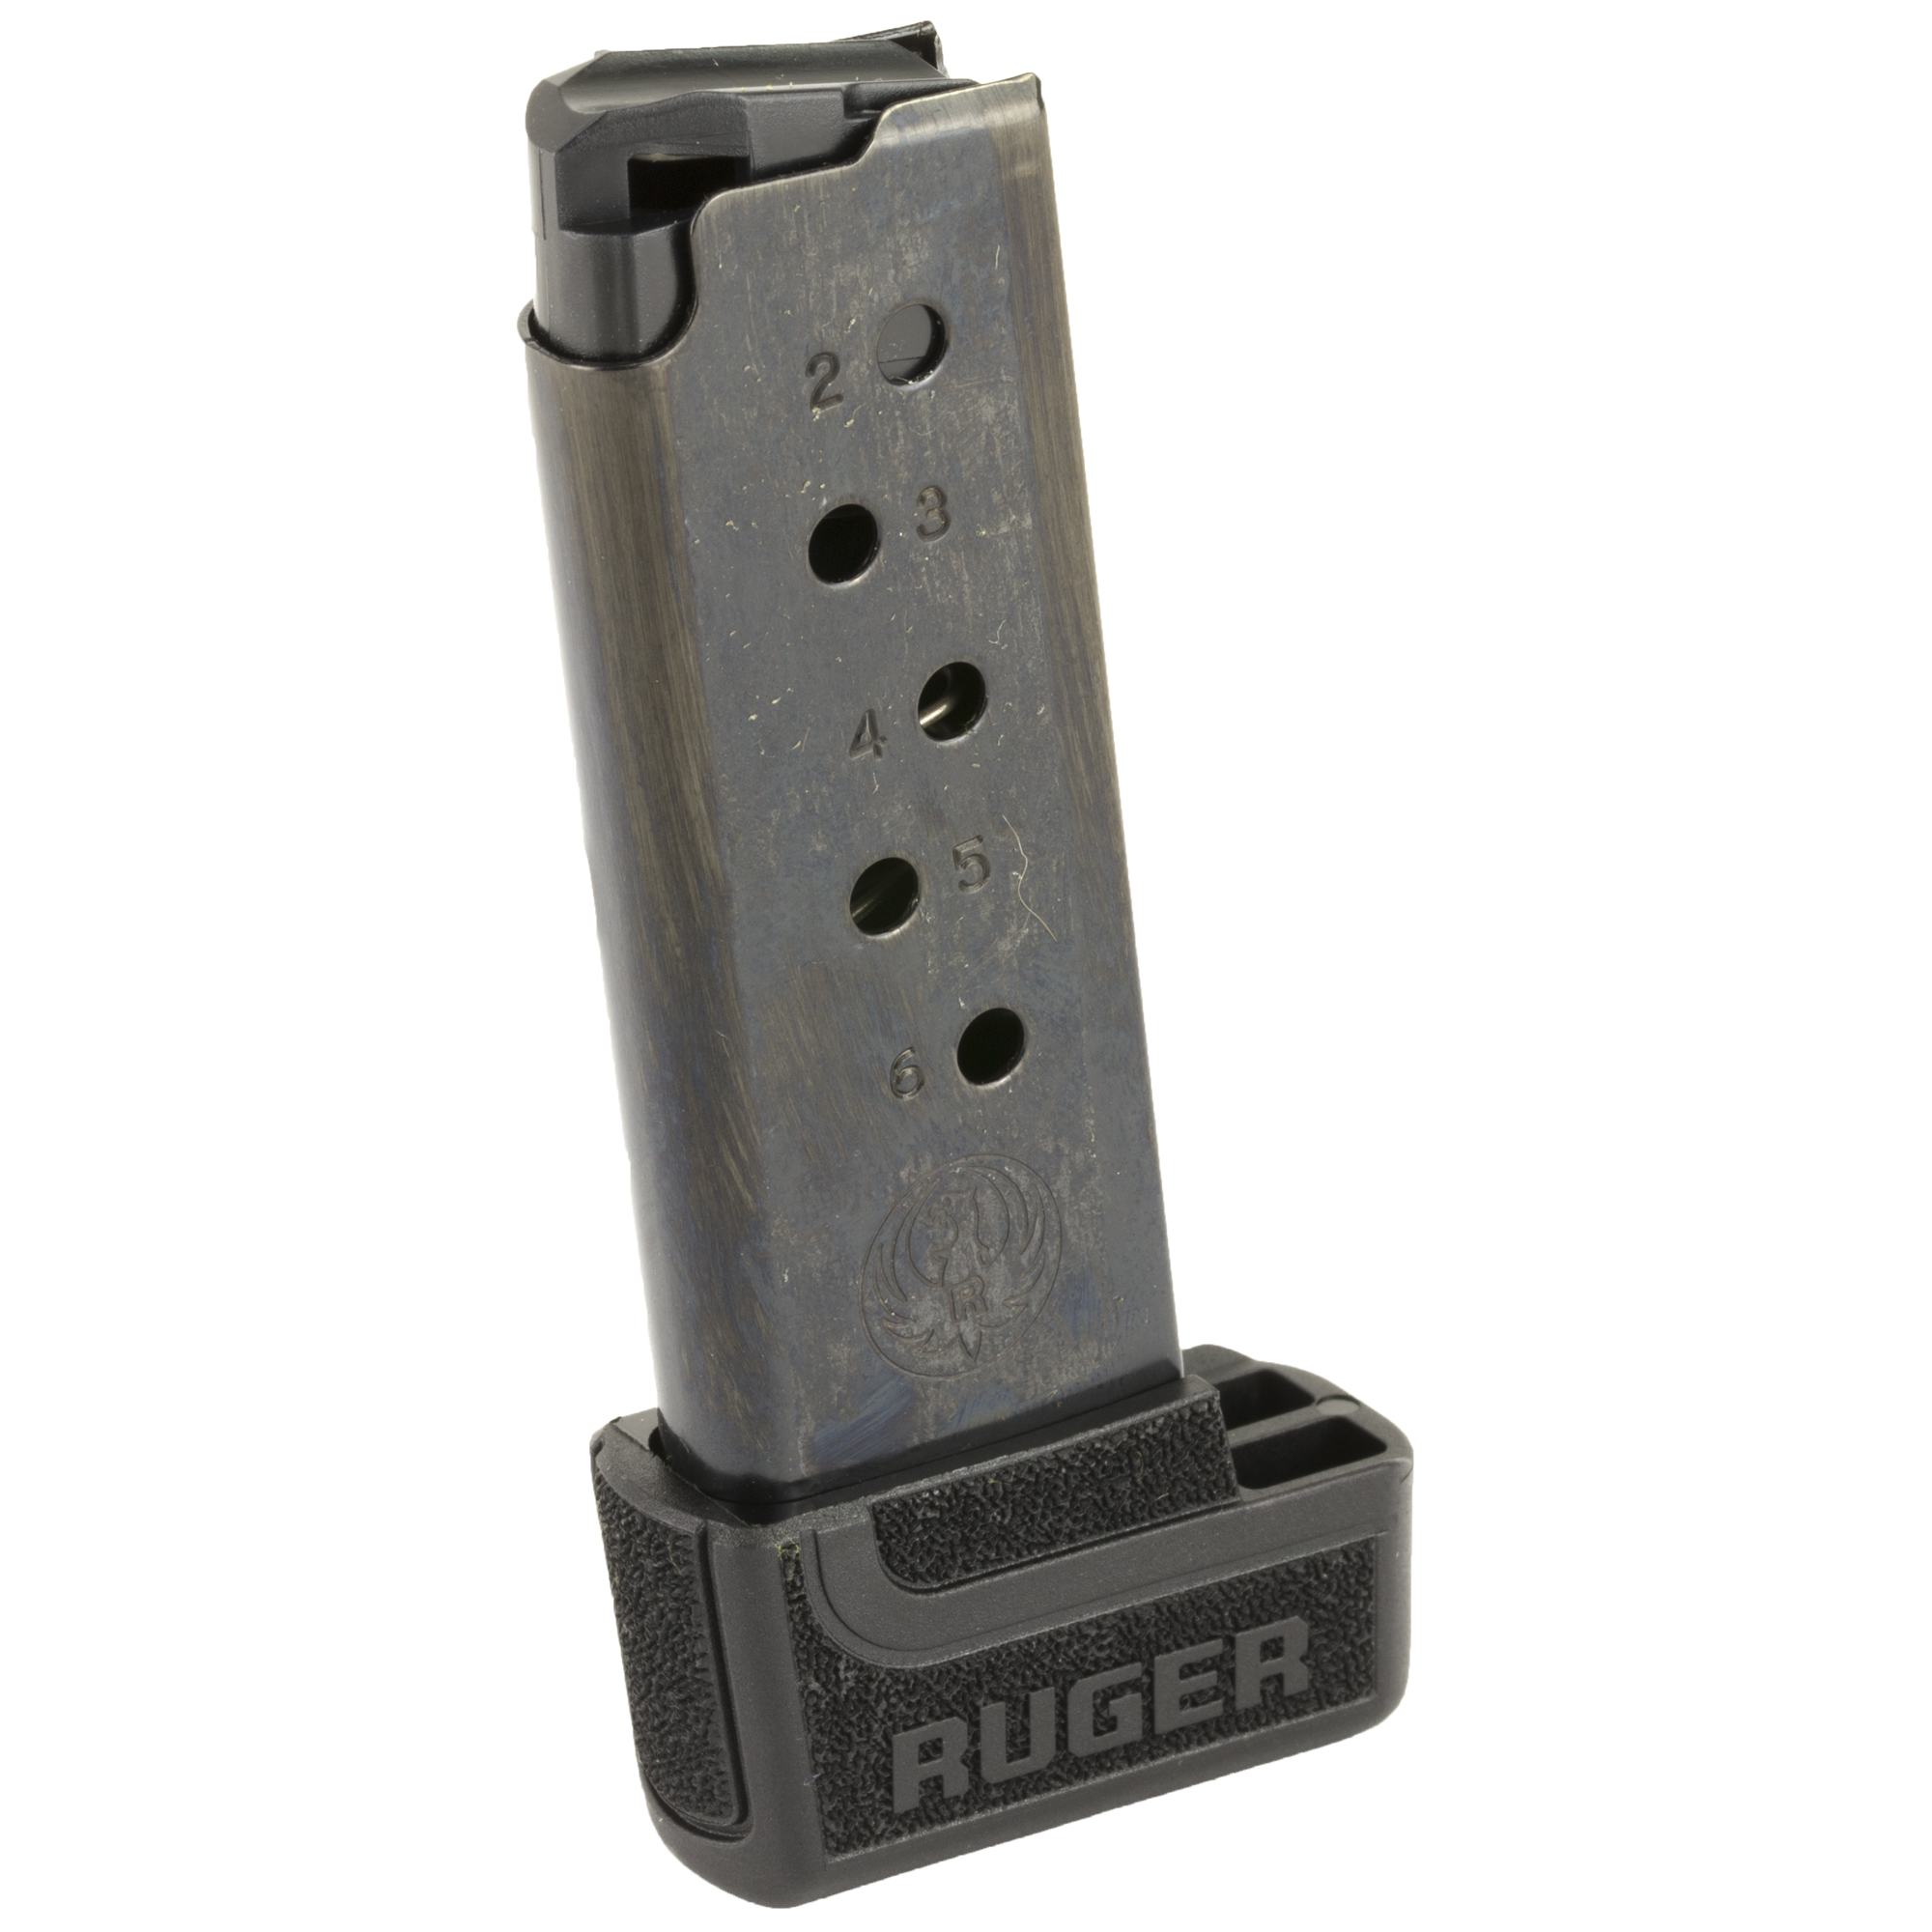 Increase your magazine capacity from 6 to 7 with this extended magazine for the ...